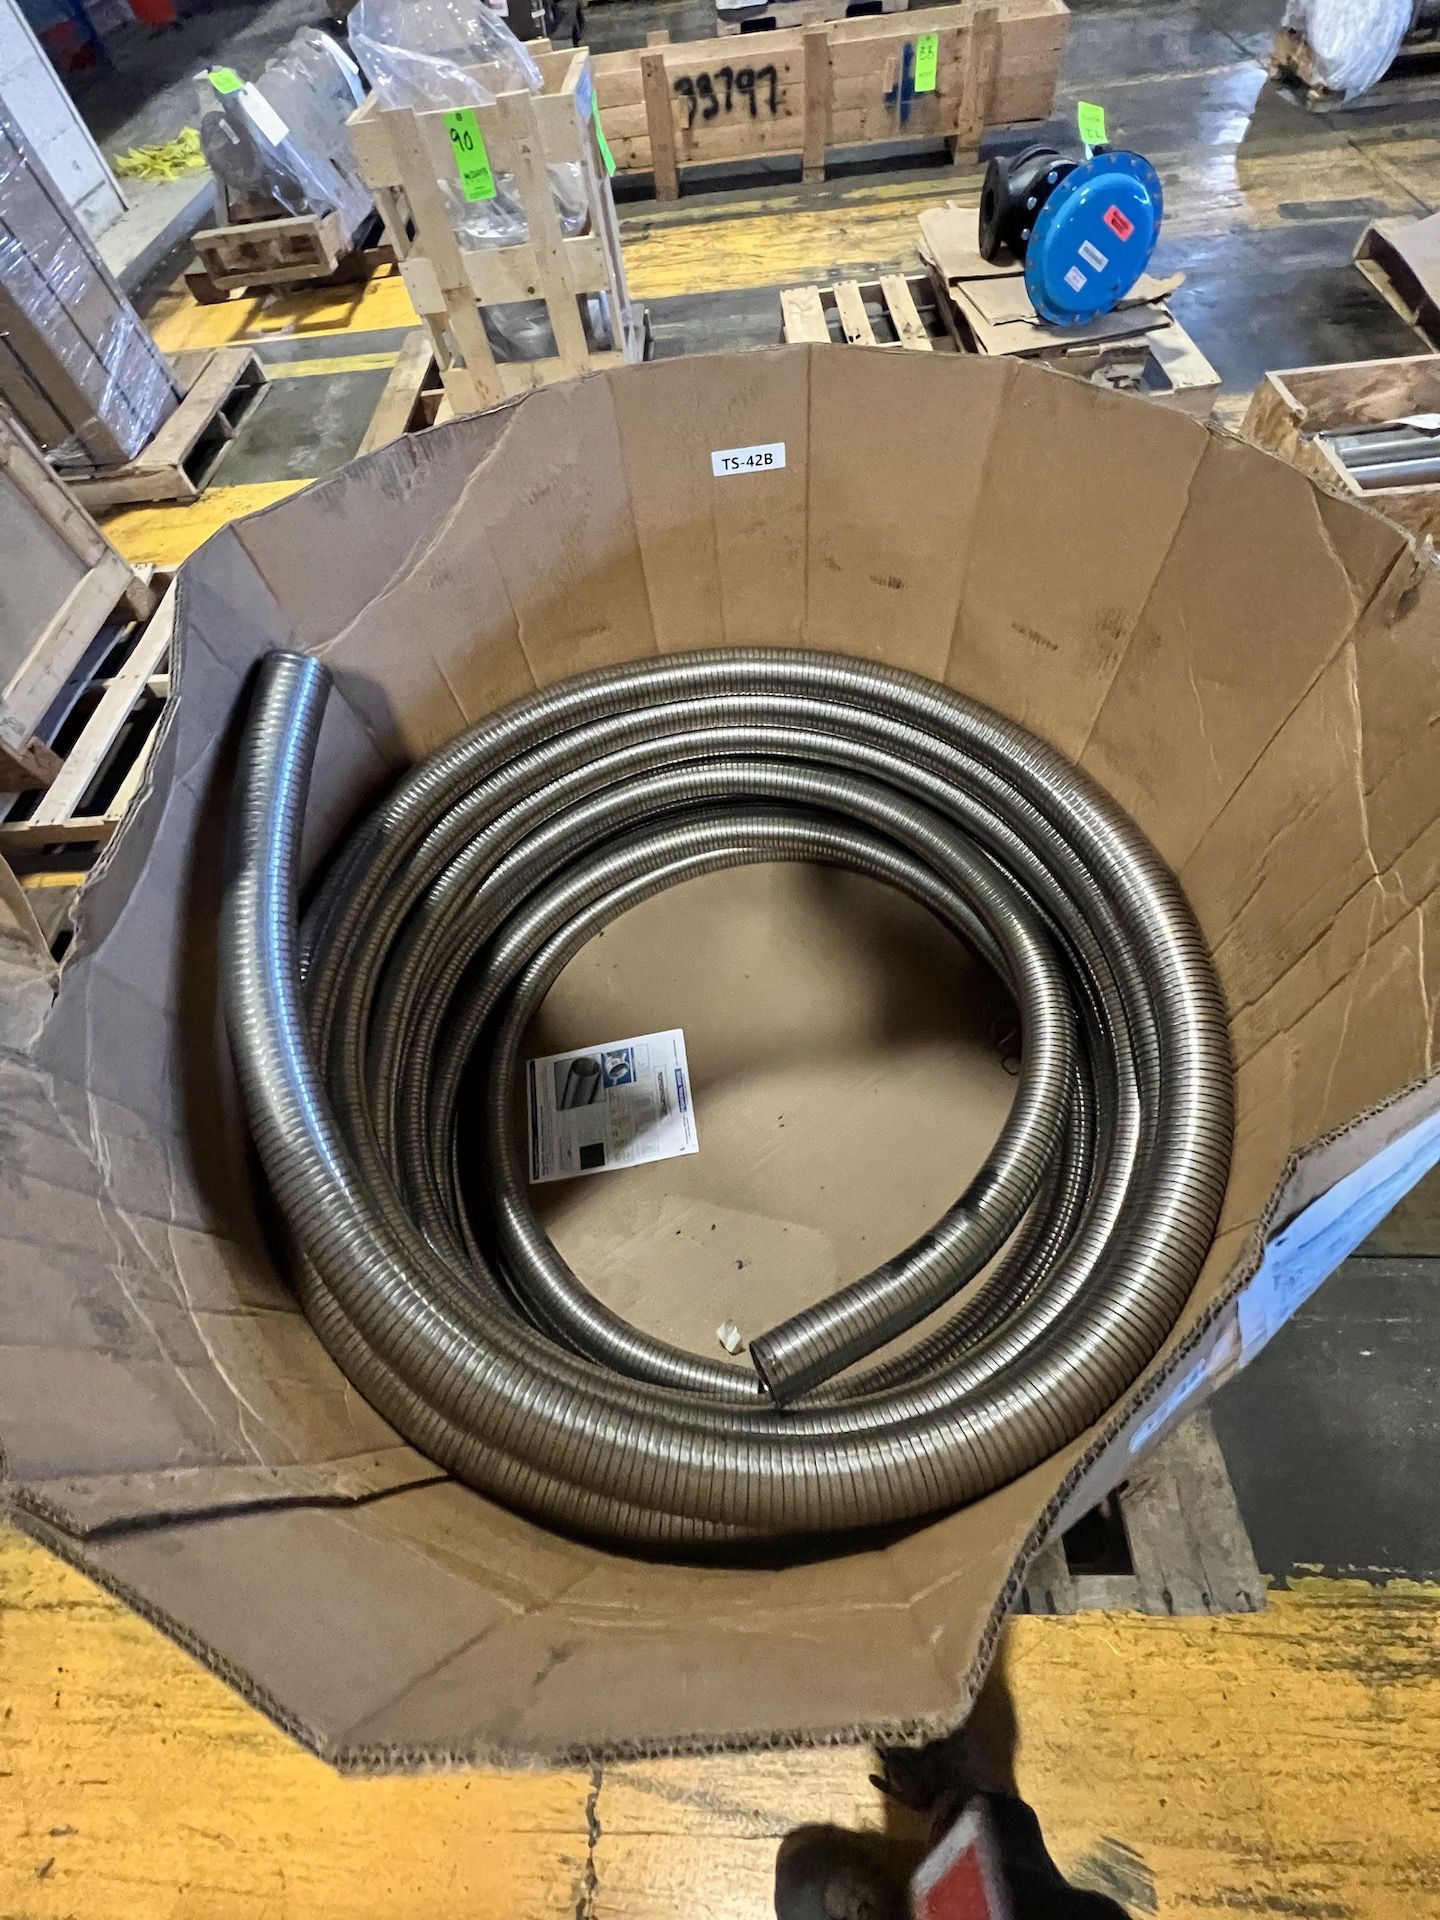 (2) Federal Super Flex, Smooth Bore, Light Duty Stainless Steel Hose # SF-300, 2 1/2" x 50' Long - Image 3 of 8